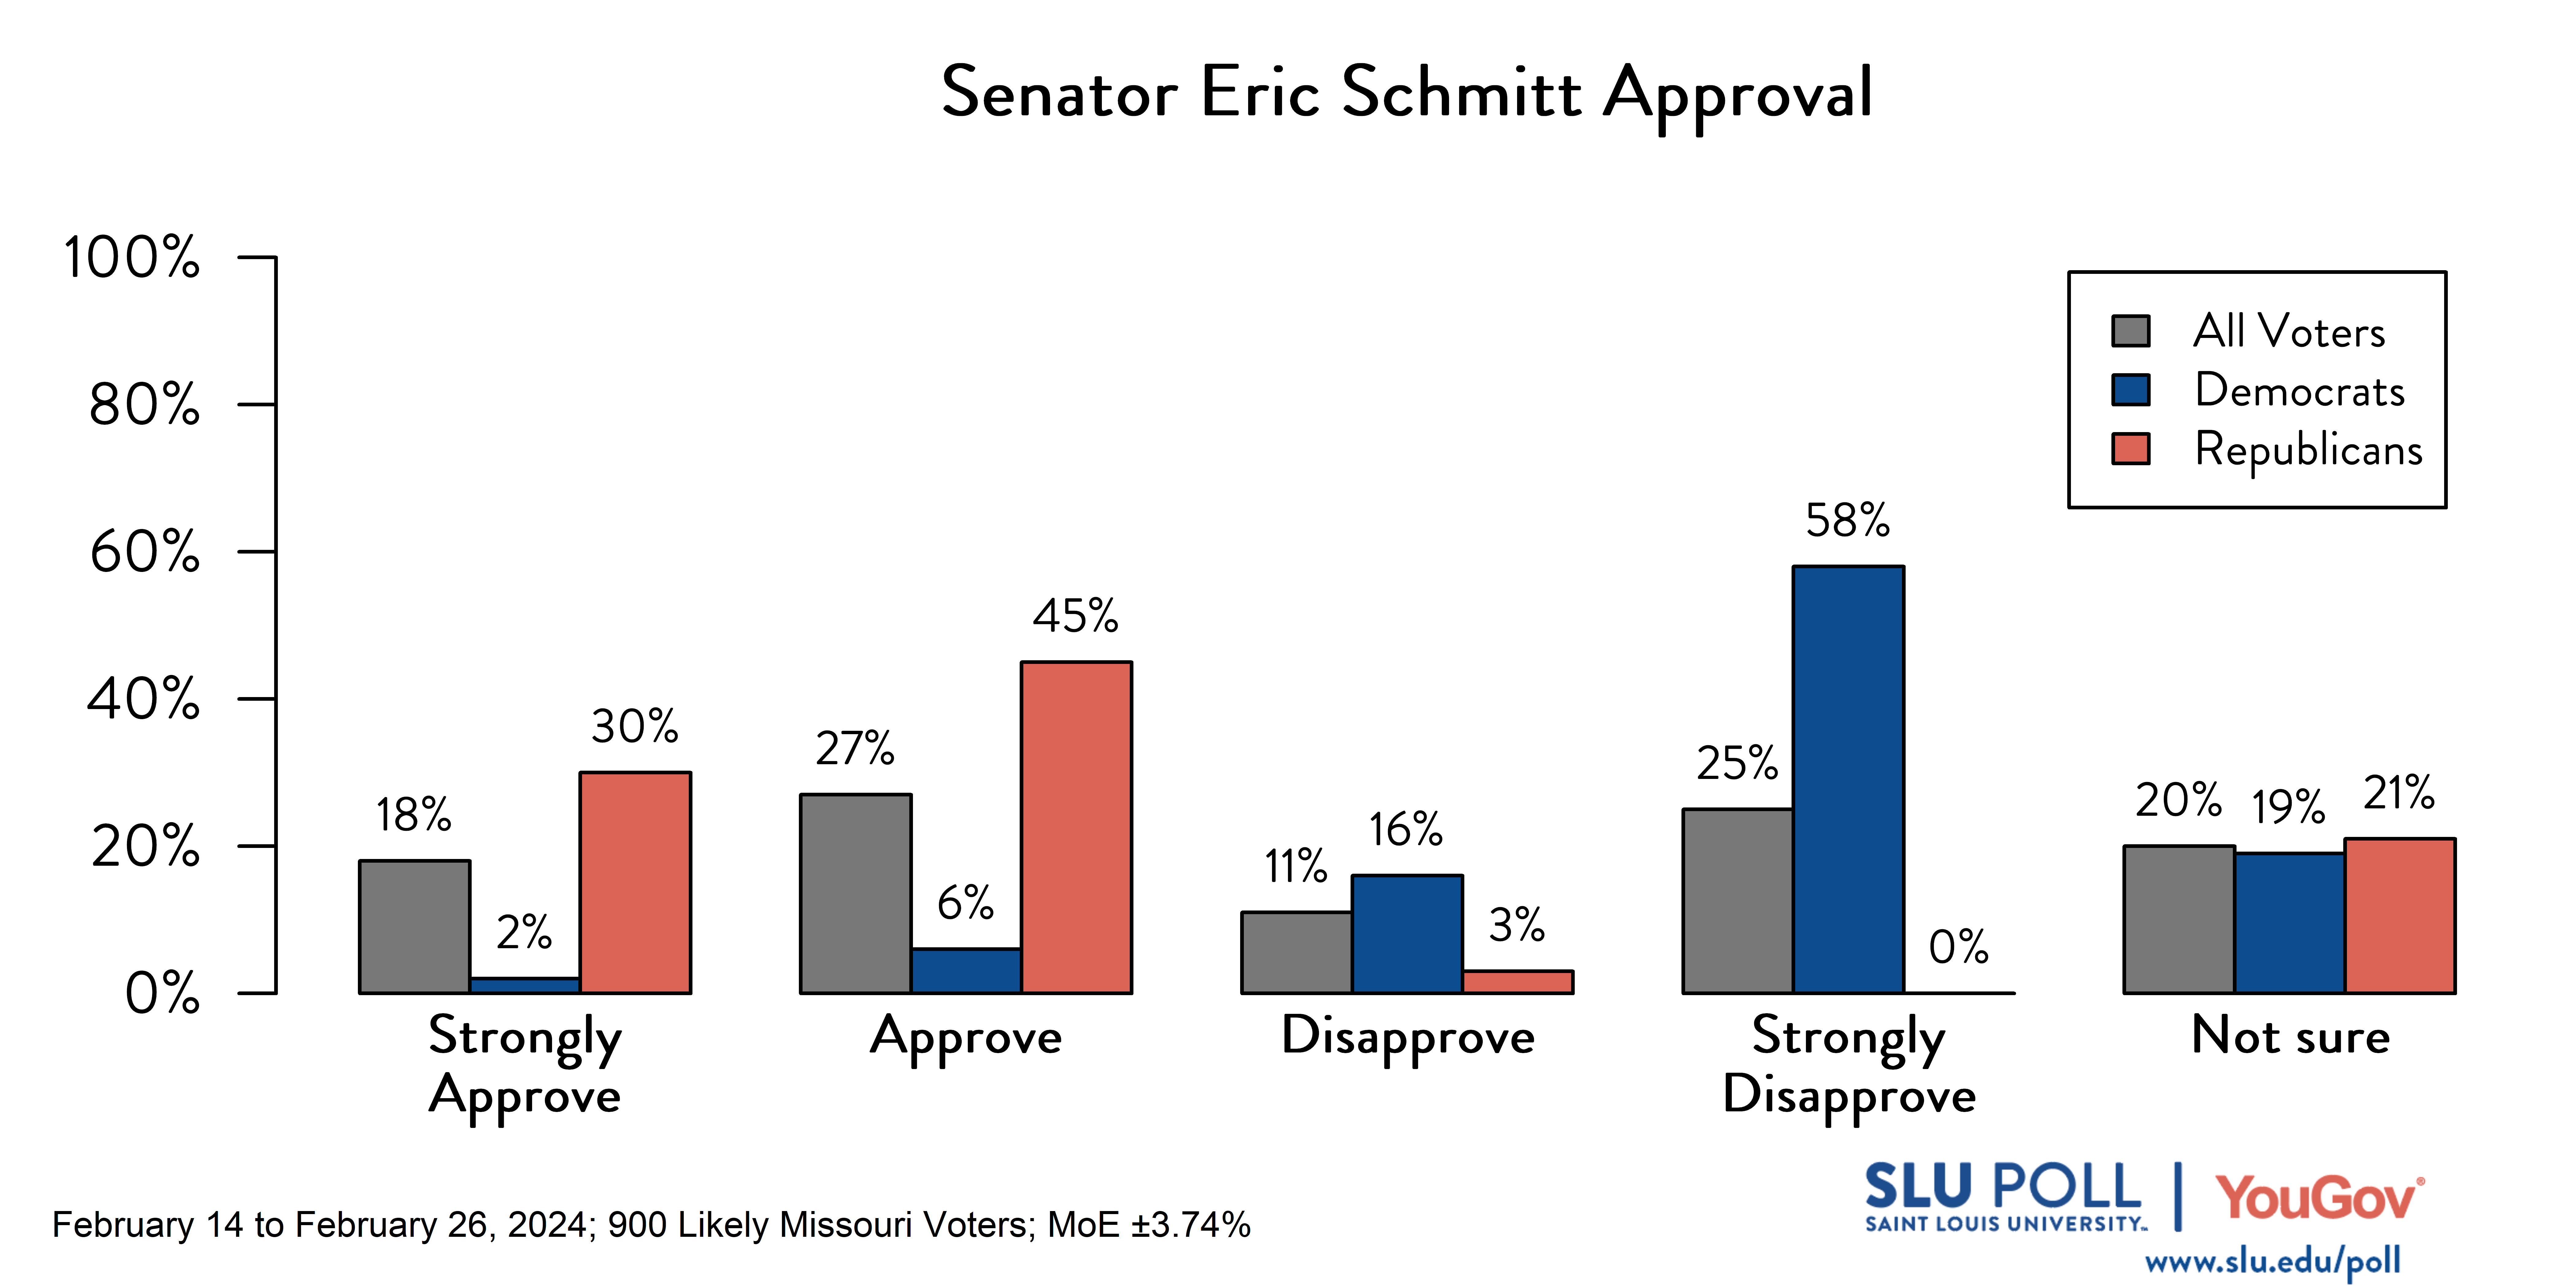 Bar graph of SLU/YouGov Poll results for Eric Schmitt approval question. Results in caption